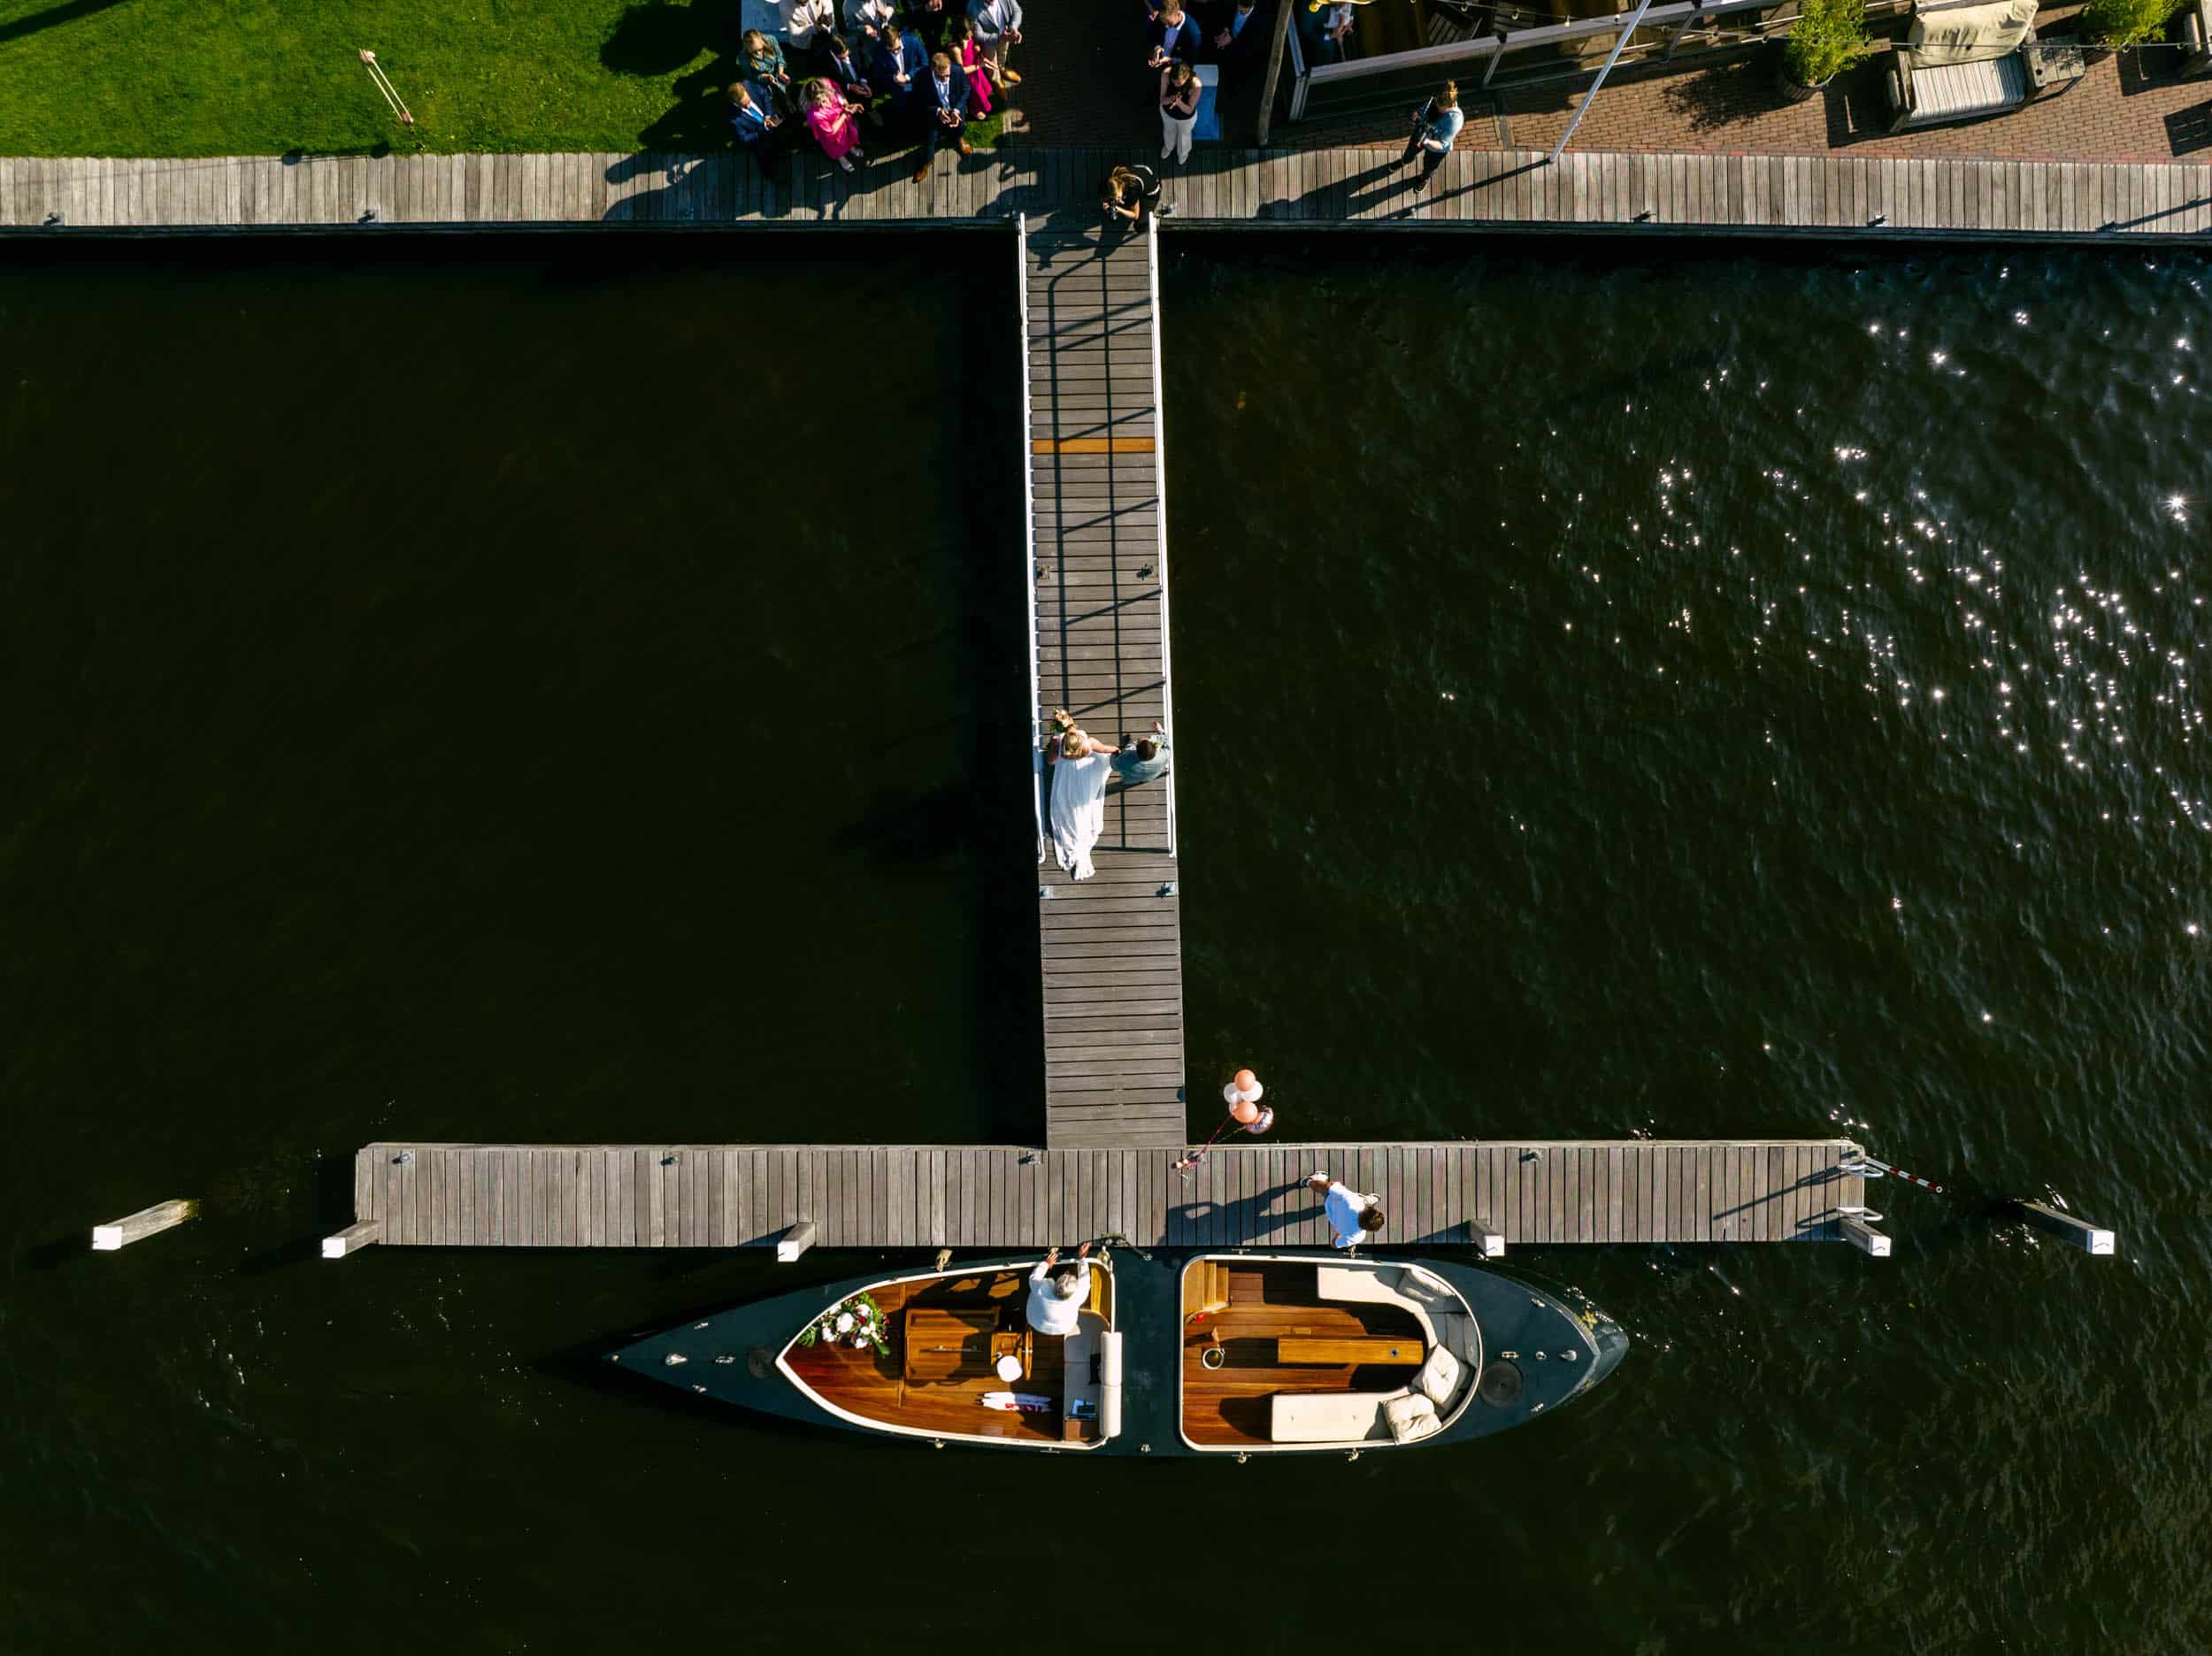 An aerial view of a boat docked at Waterlust.